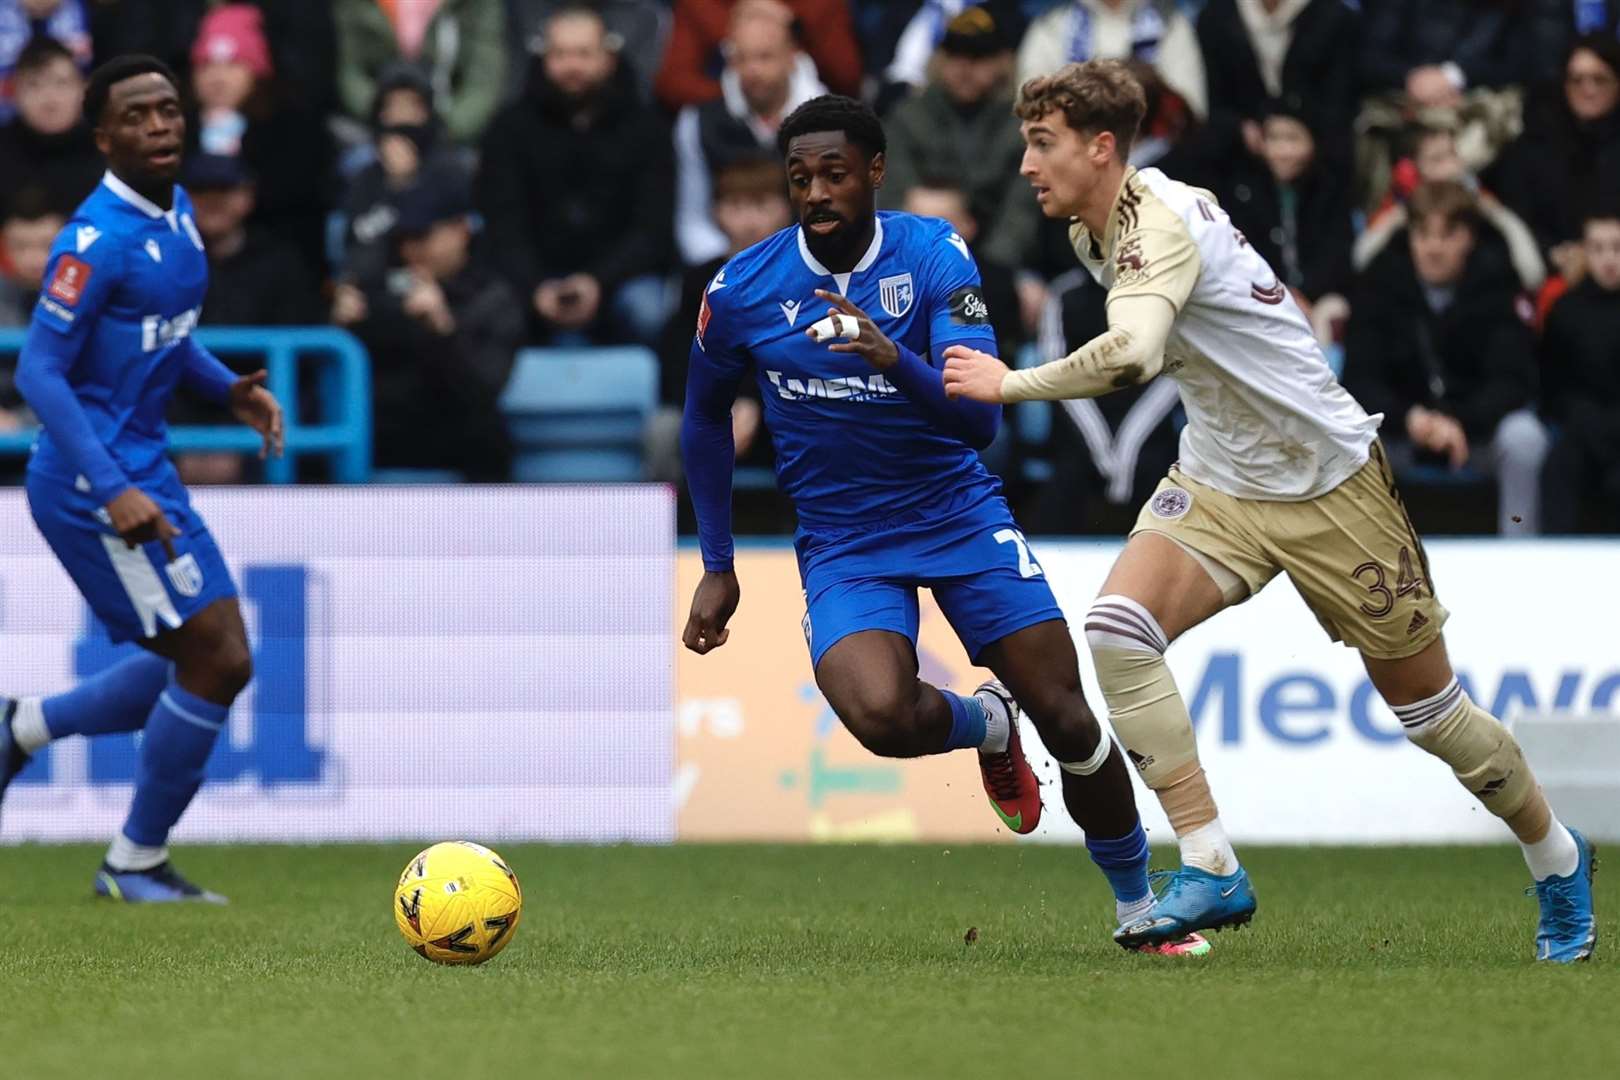 Hakeeb Adelakun in action for Gillingham against Leicester City in the FA Cup at Priestfield